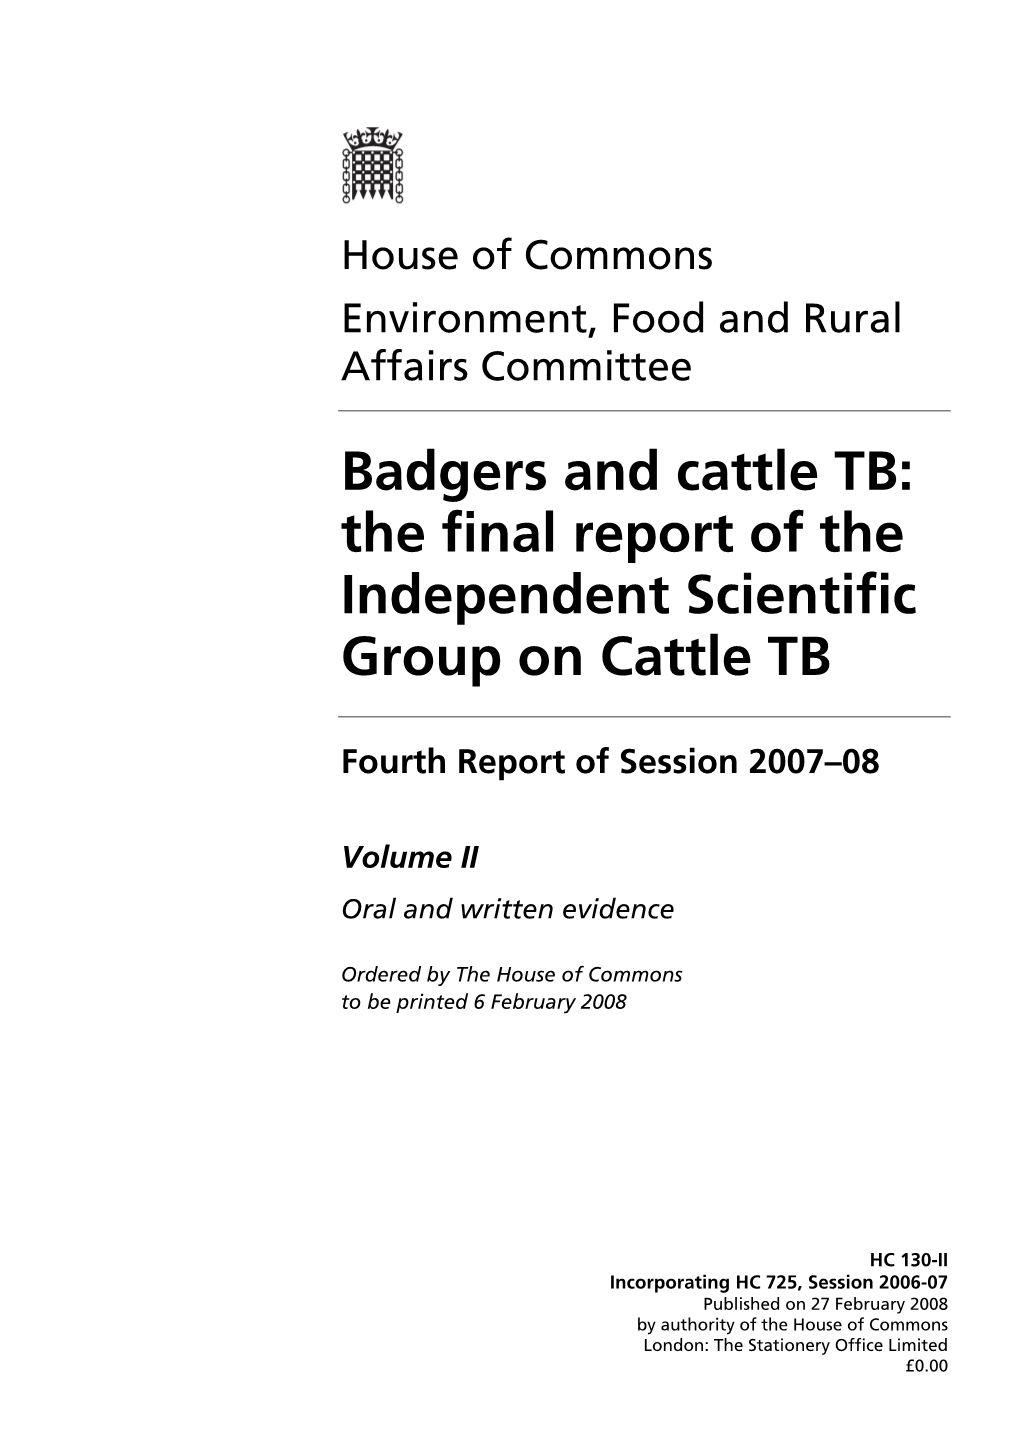 Badgers and Cattle TB: the Final Report of the Independent Scientific Group on Cattle TB